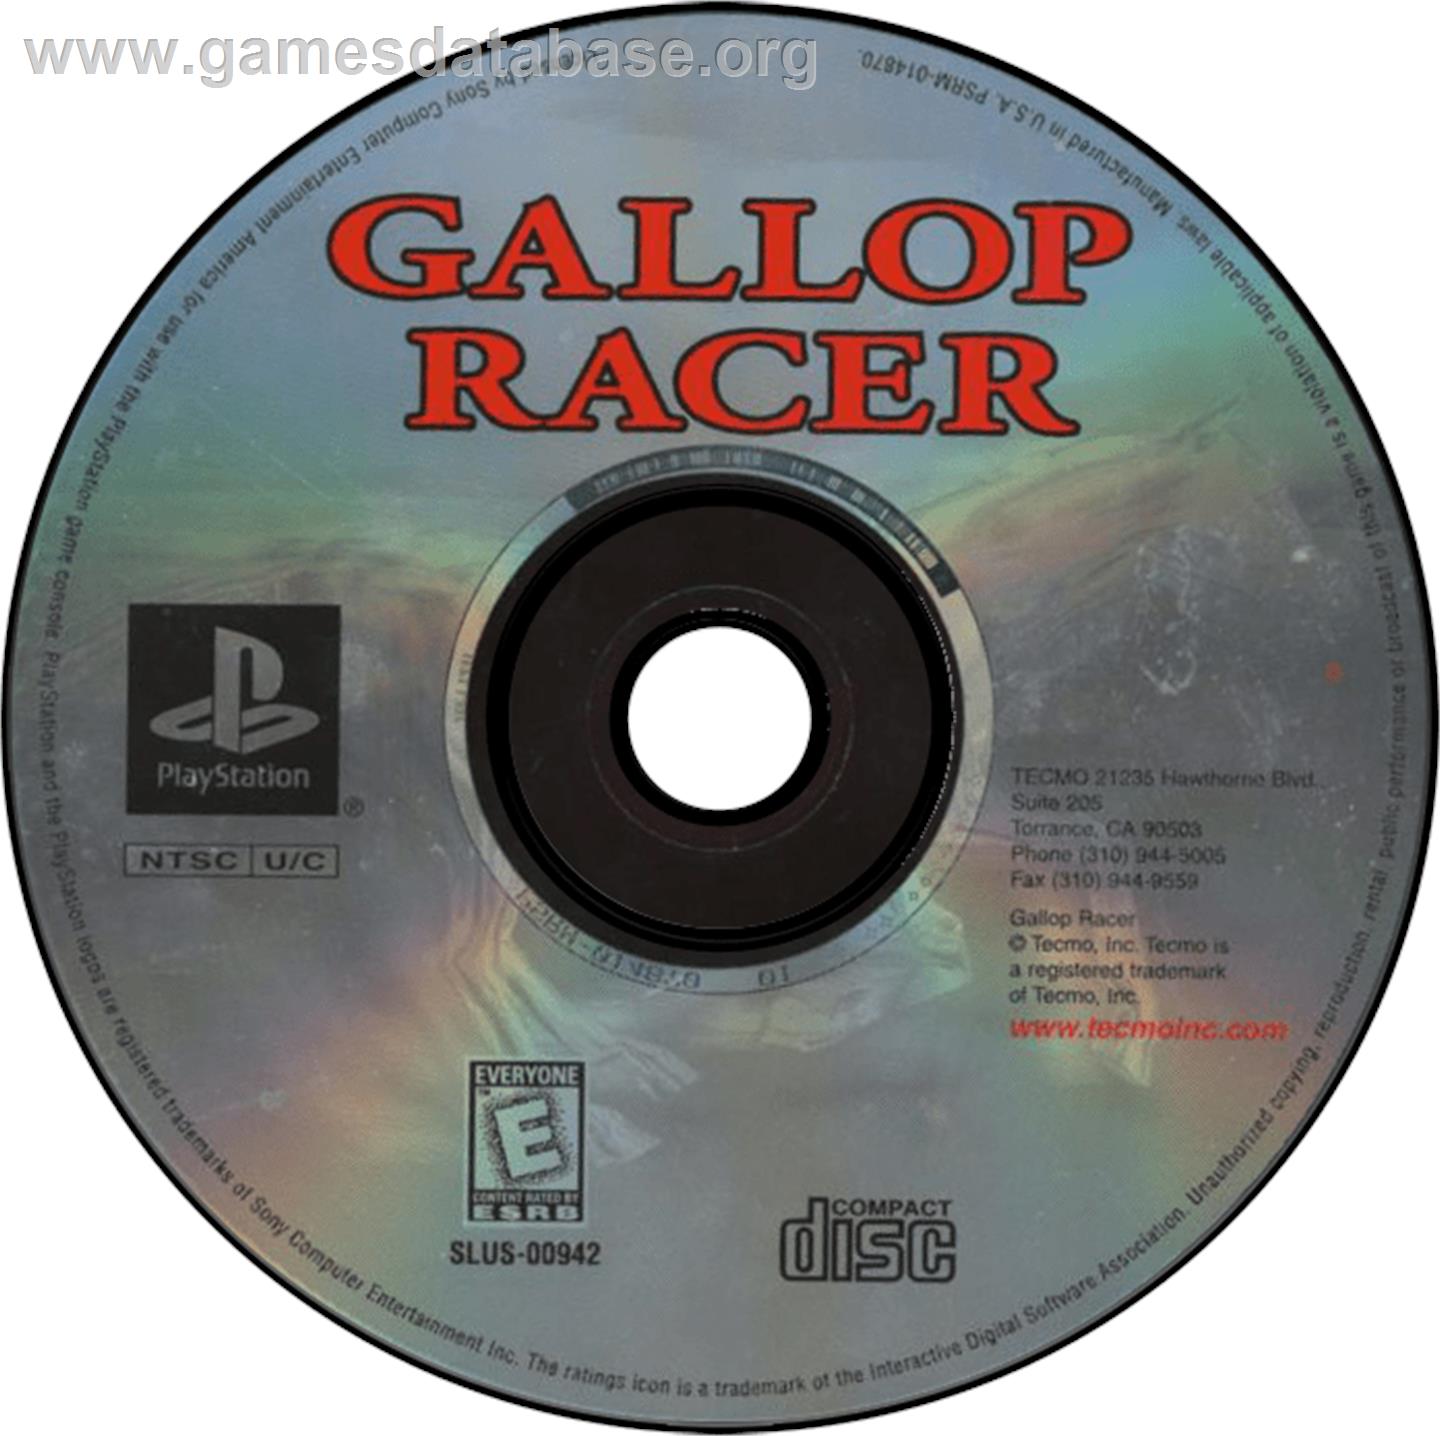 Gallop Racer - Sony Playstation - Artwork - Disc